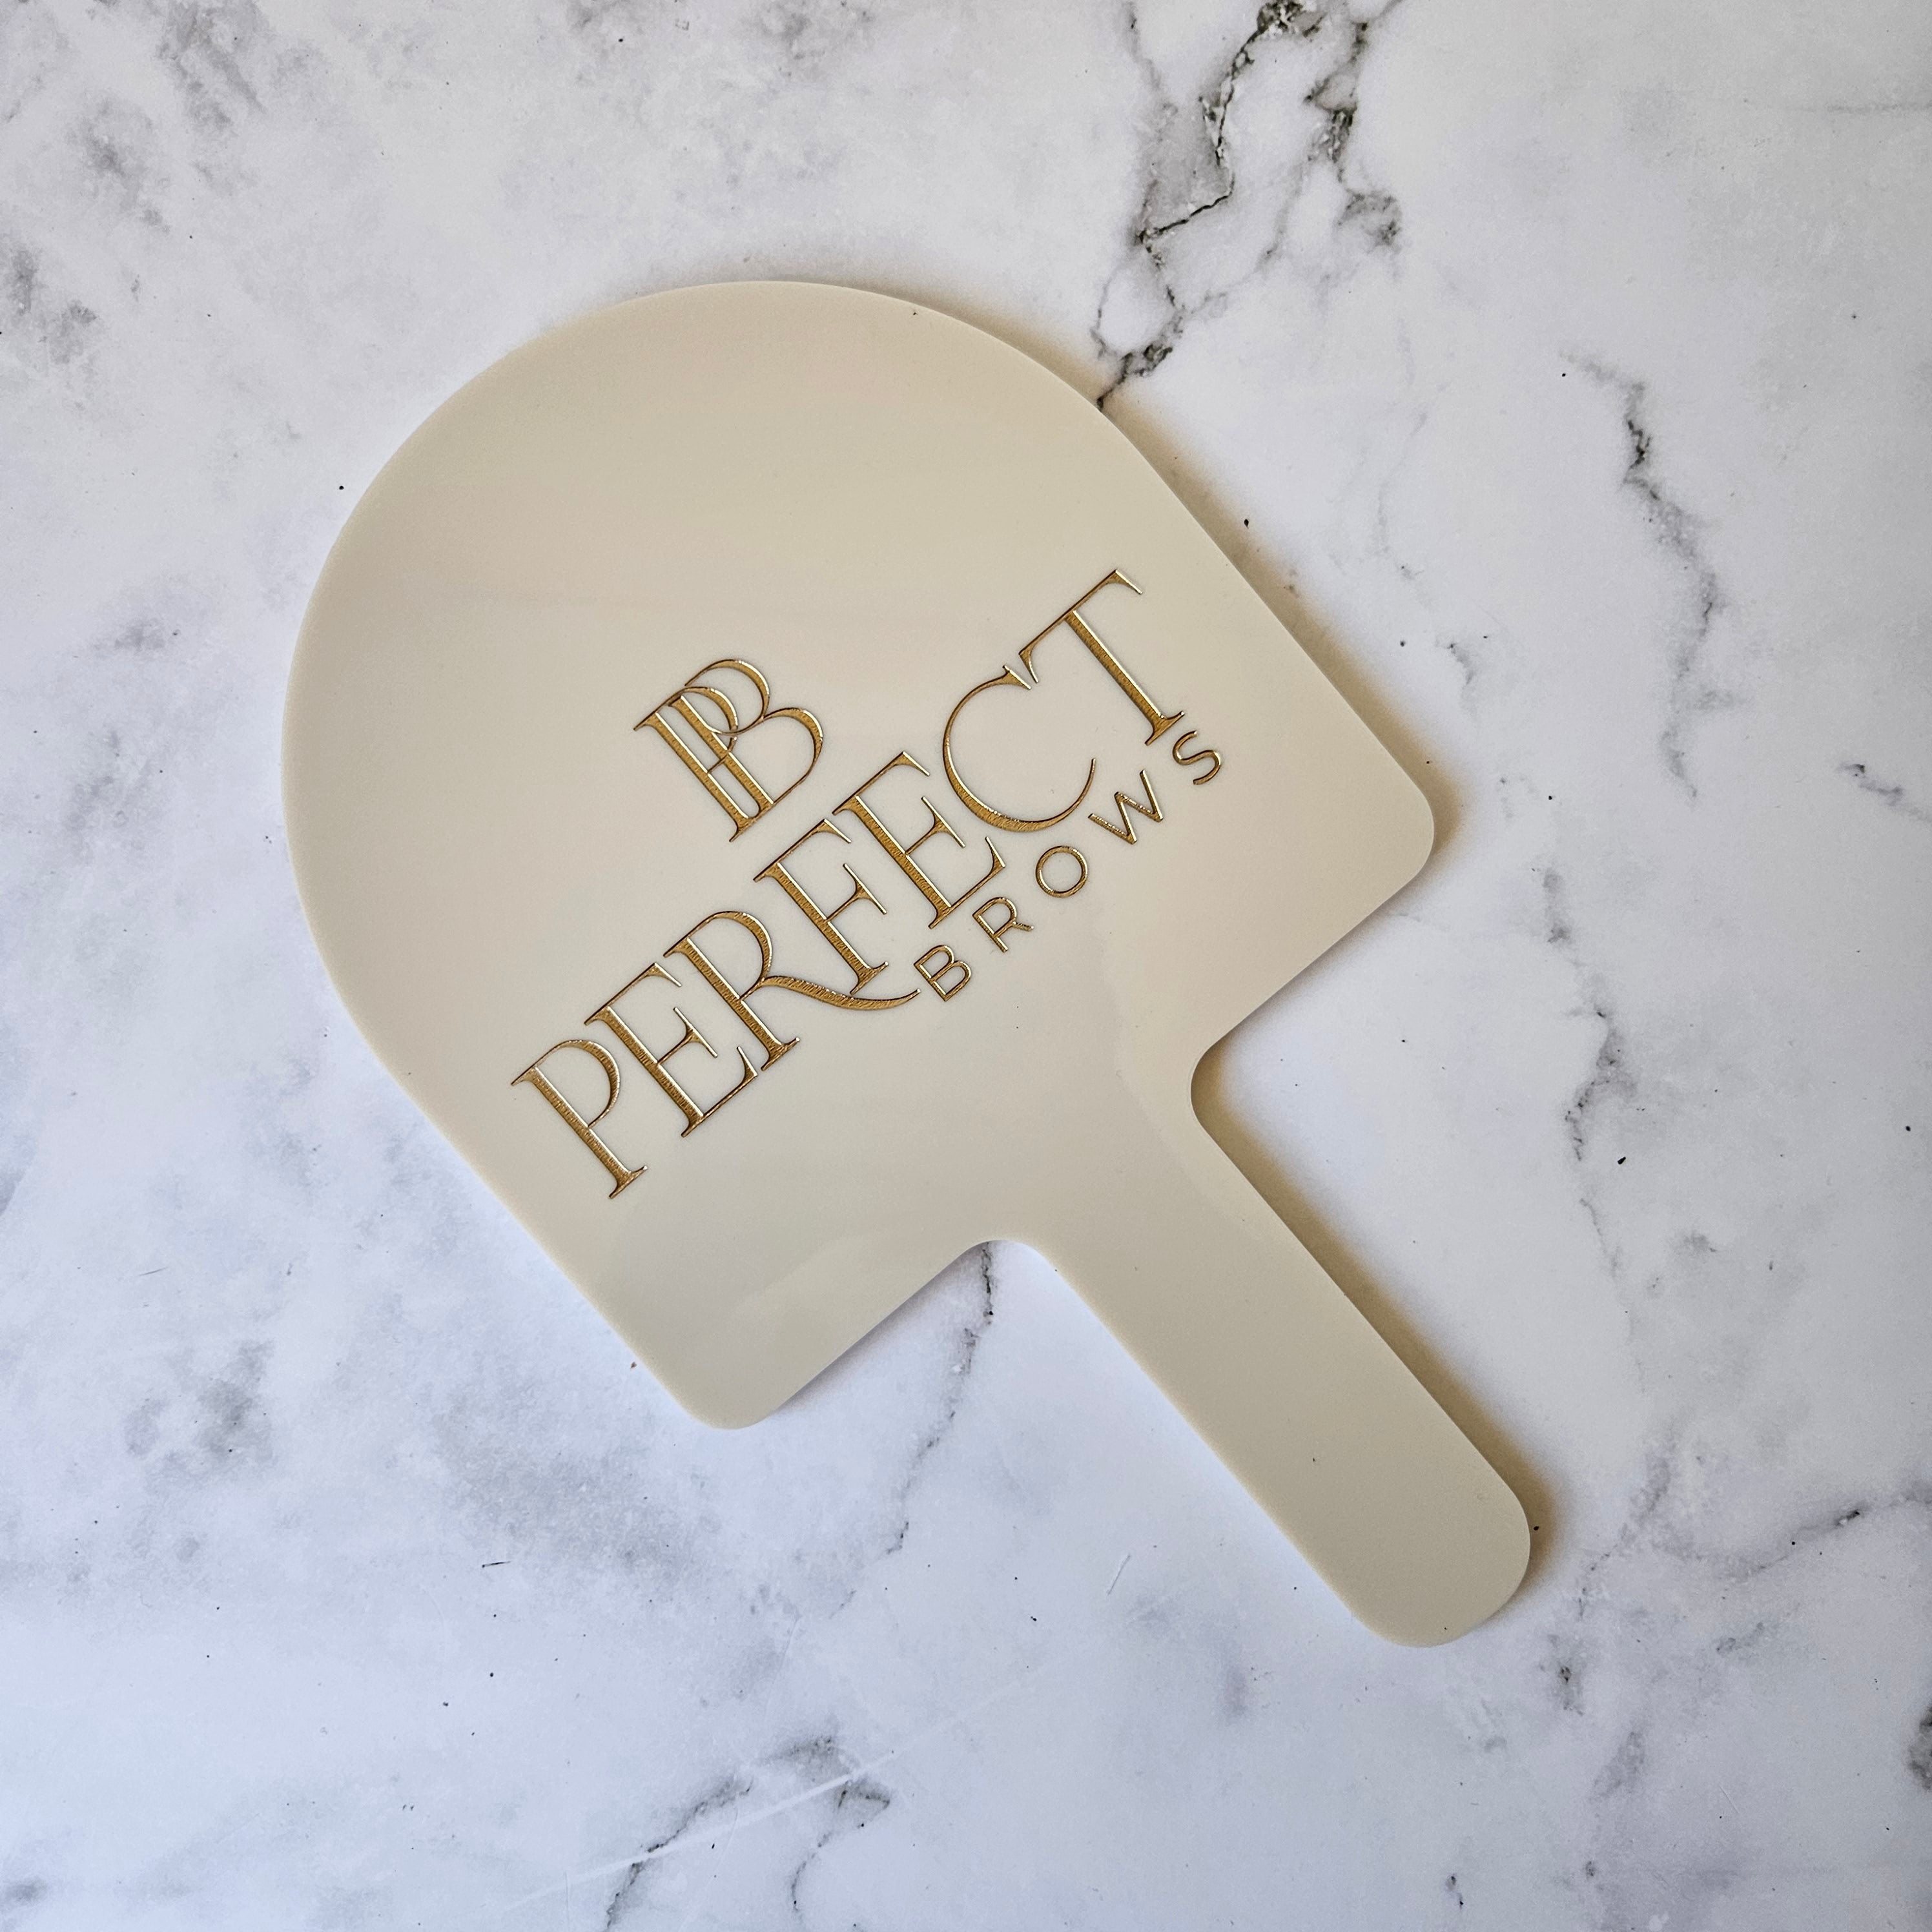 Custom Handheld Mirror Personalised with Branding in Gold for Salons made by Custom Aesthetic Designs